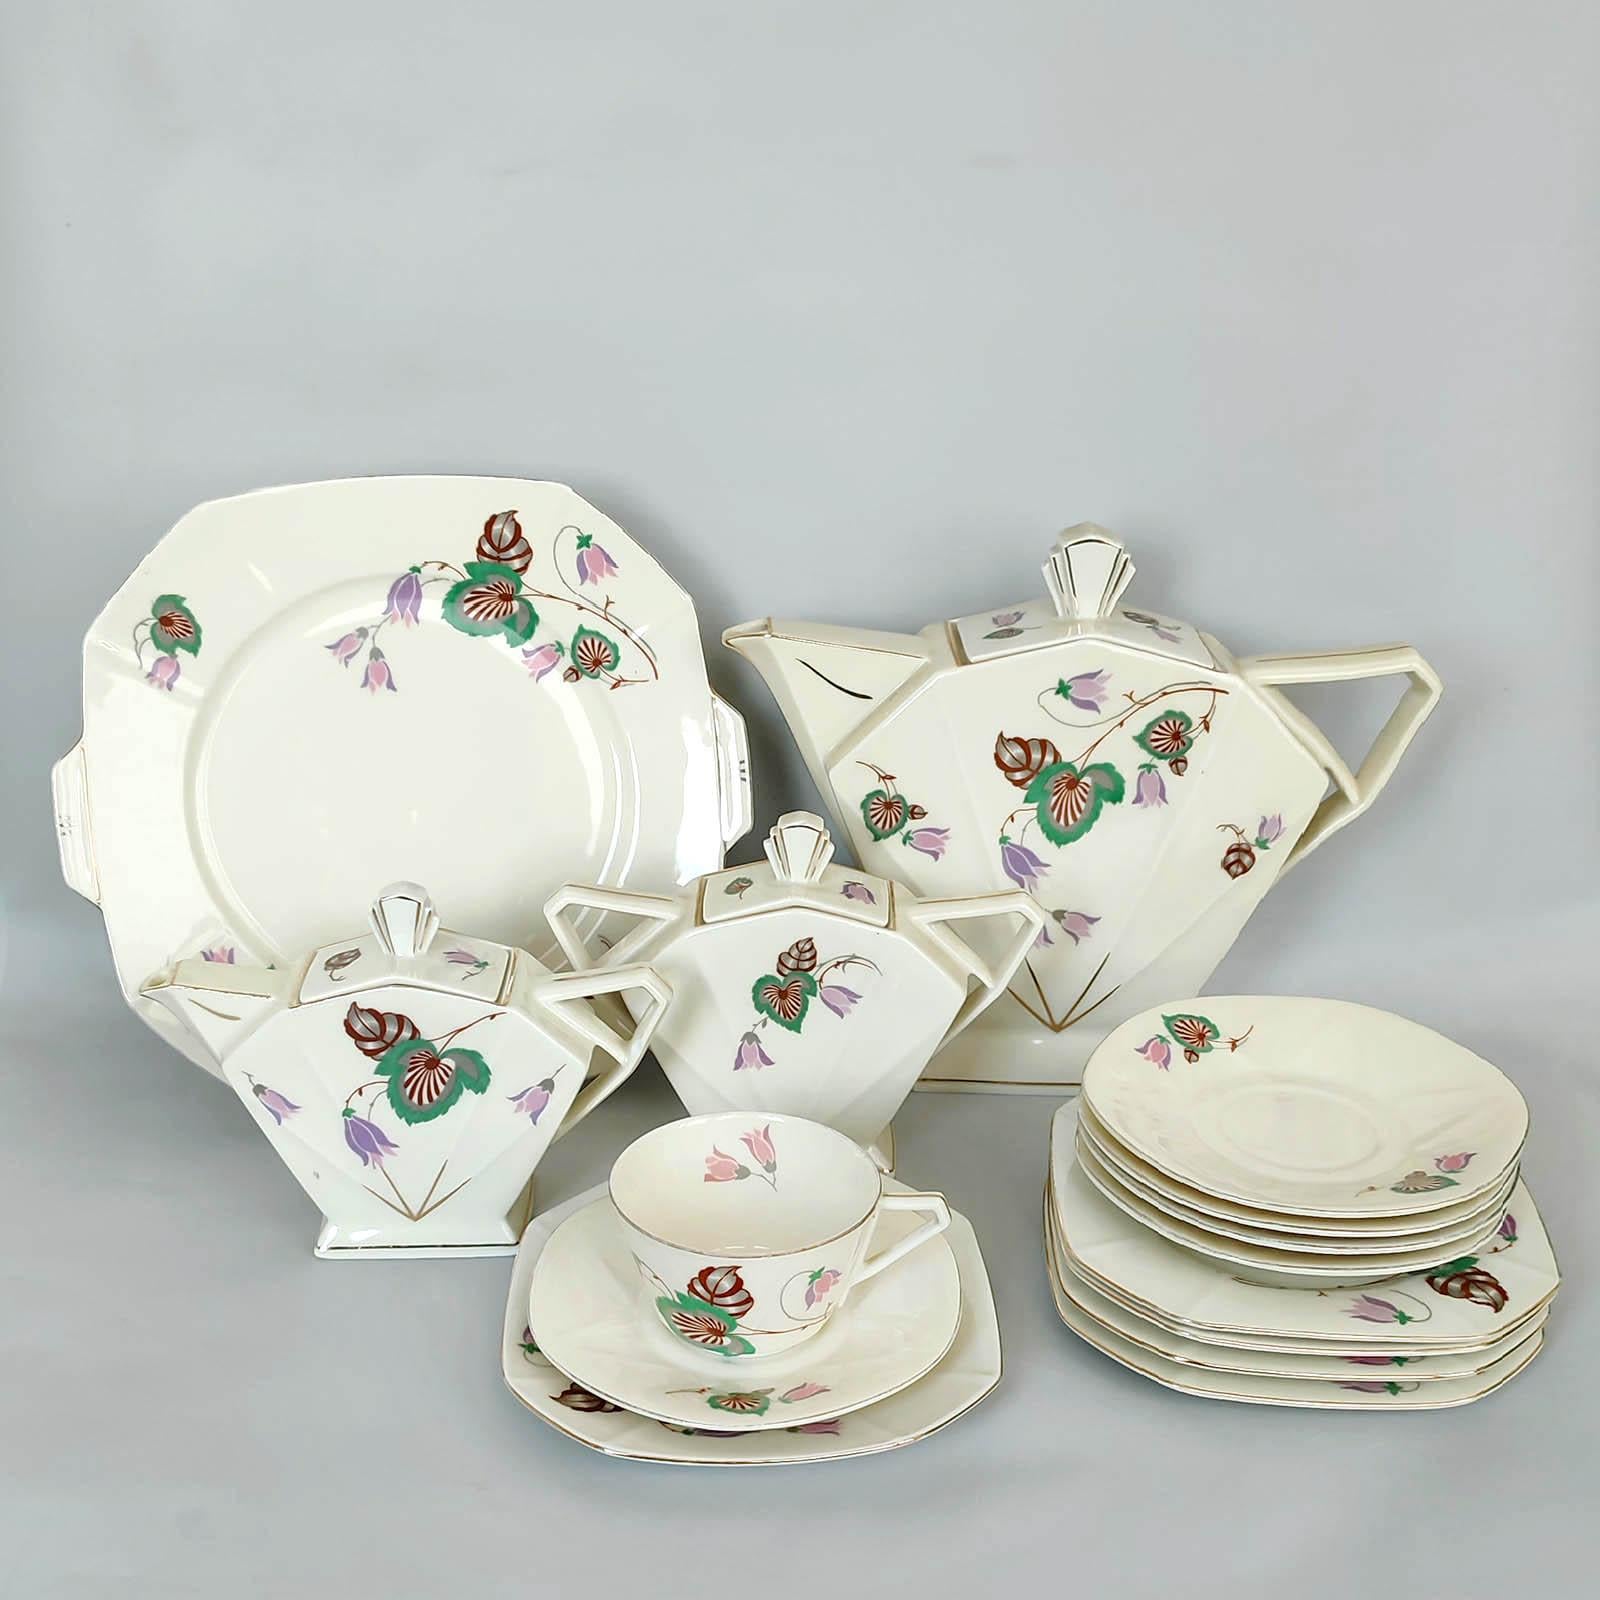 Delightfully angular pure Art Deco porcelain tea / coffee and dessert serving set for 5 by Victoria, Czechoslovakia. 
Comprising: jug, sugar bowl, milk jug, serving plate, 5 cups with saucers and 5 dessert plates.
Each piece marked to the bottom